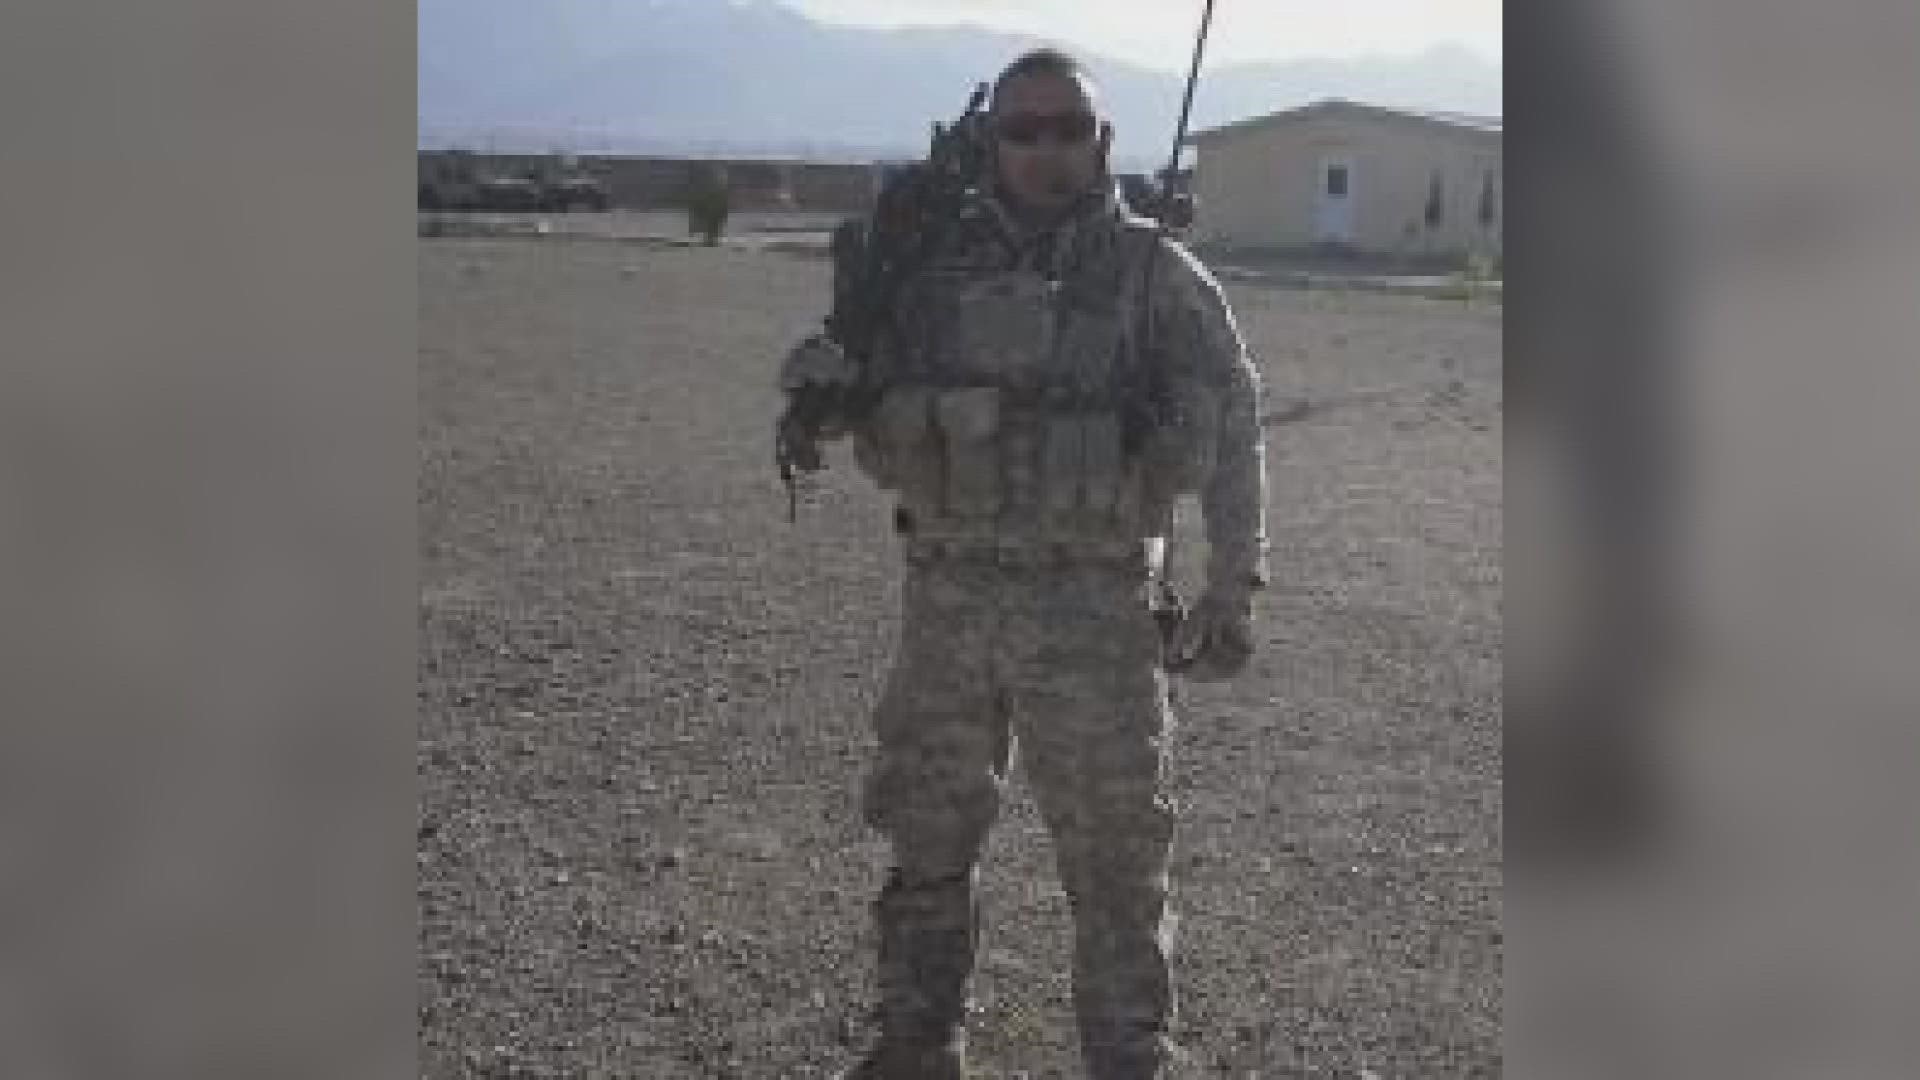 San Pao served in Afghanistan in 2010 and also served in Iraq. He said he is heartbroken after learning 13 U.S. service members were killed during a suicide attack.